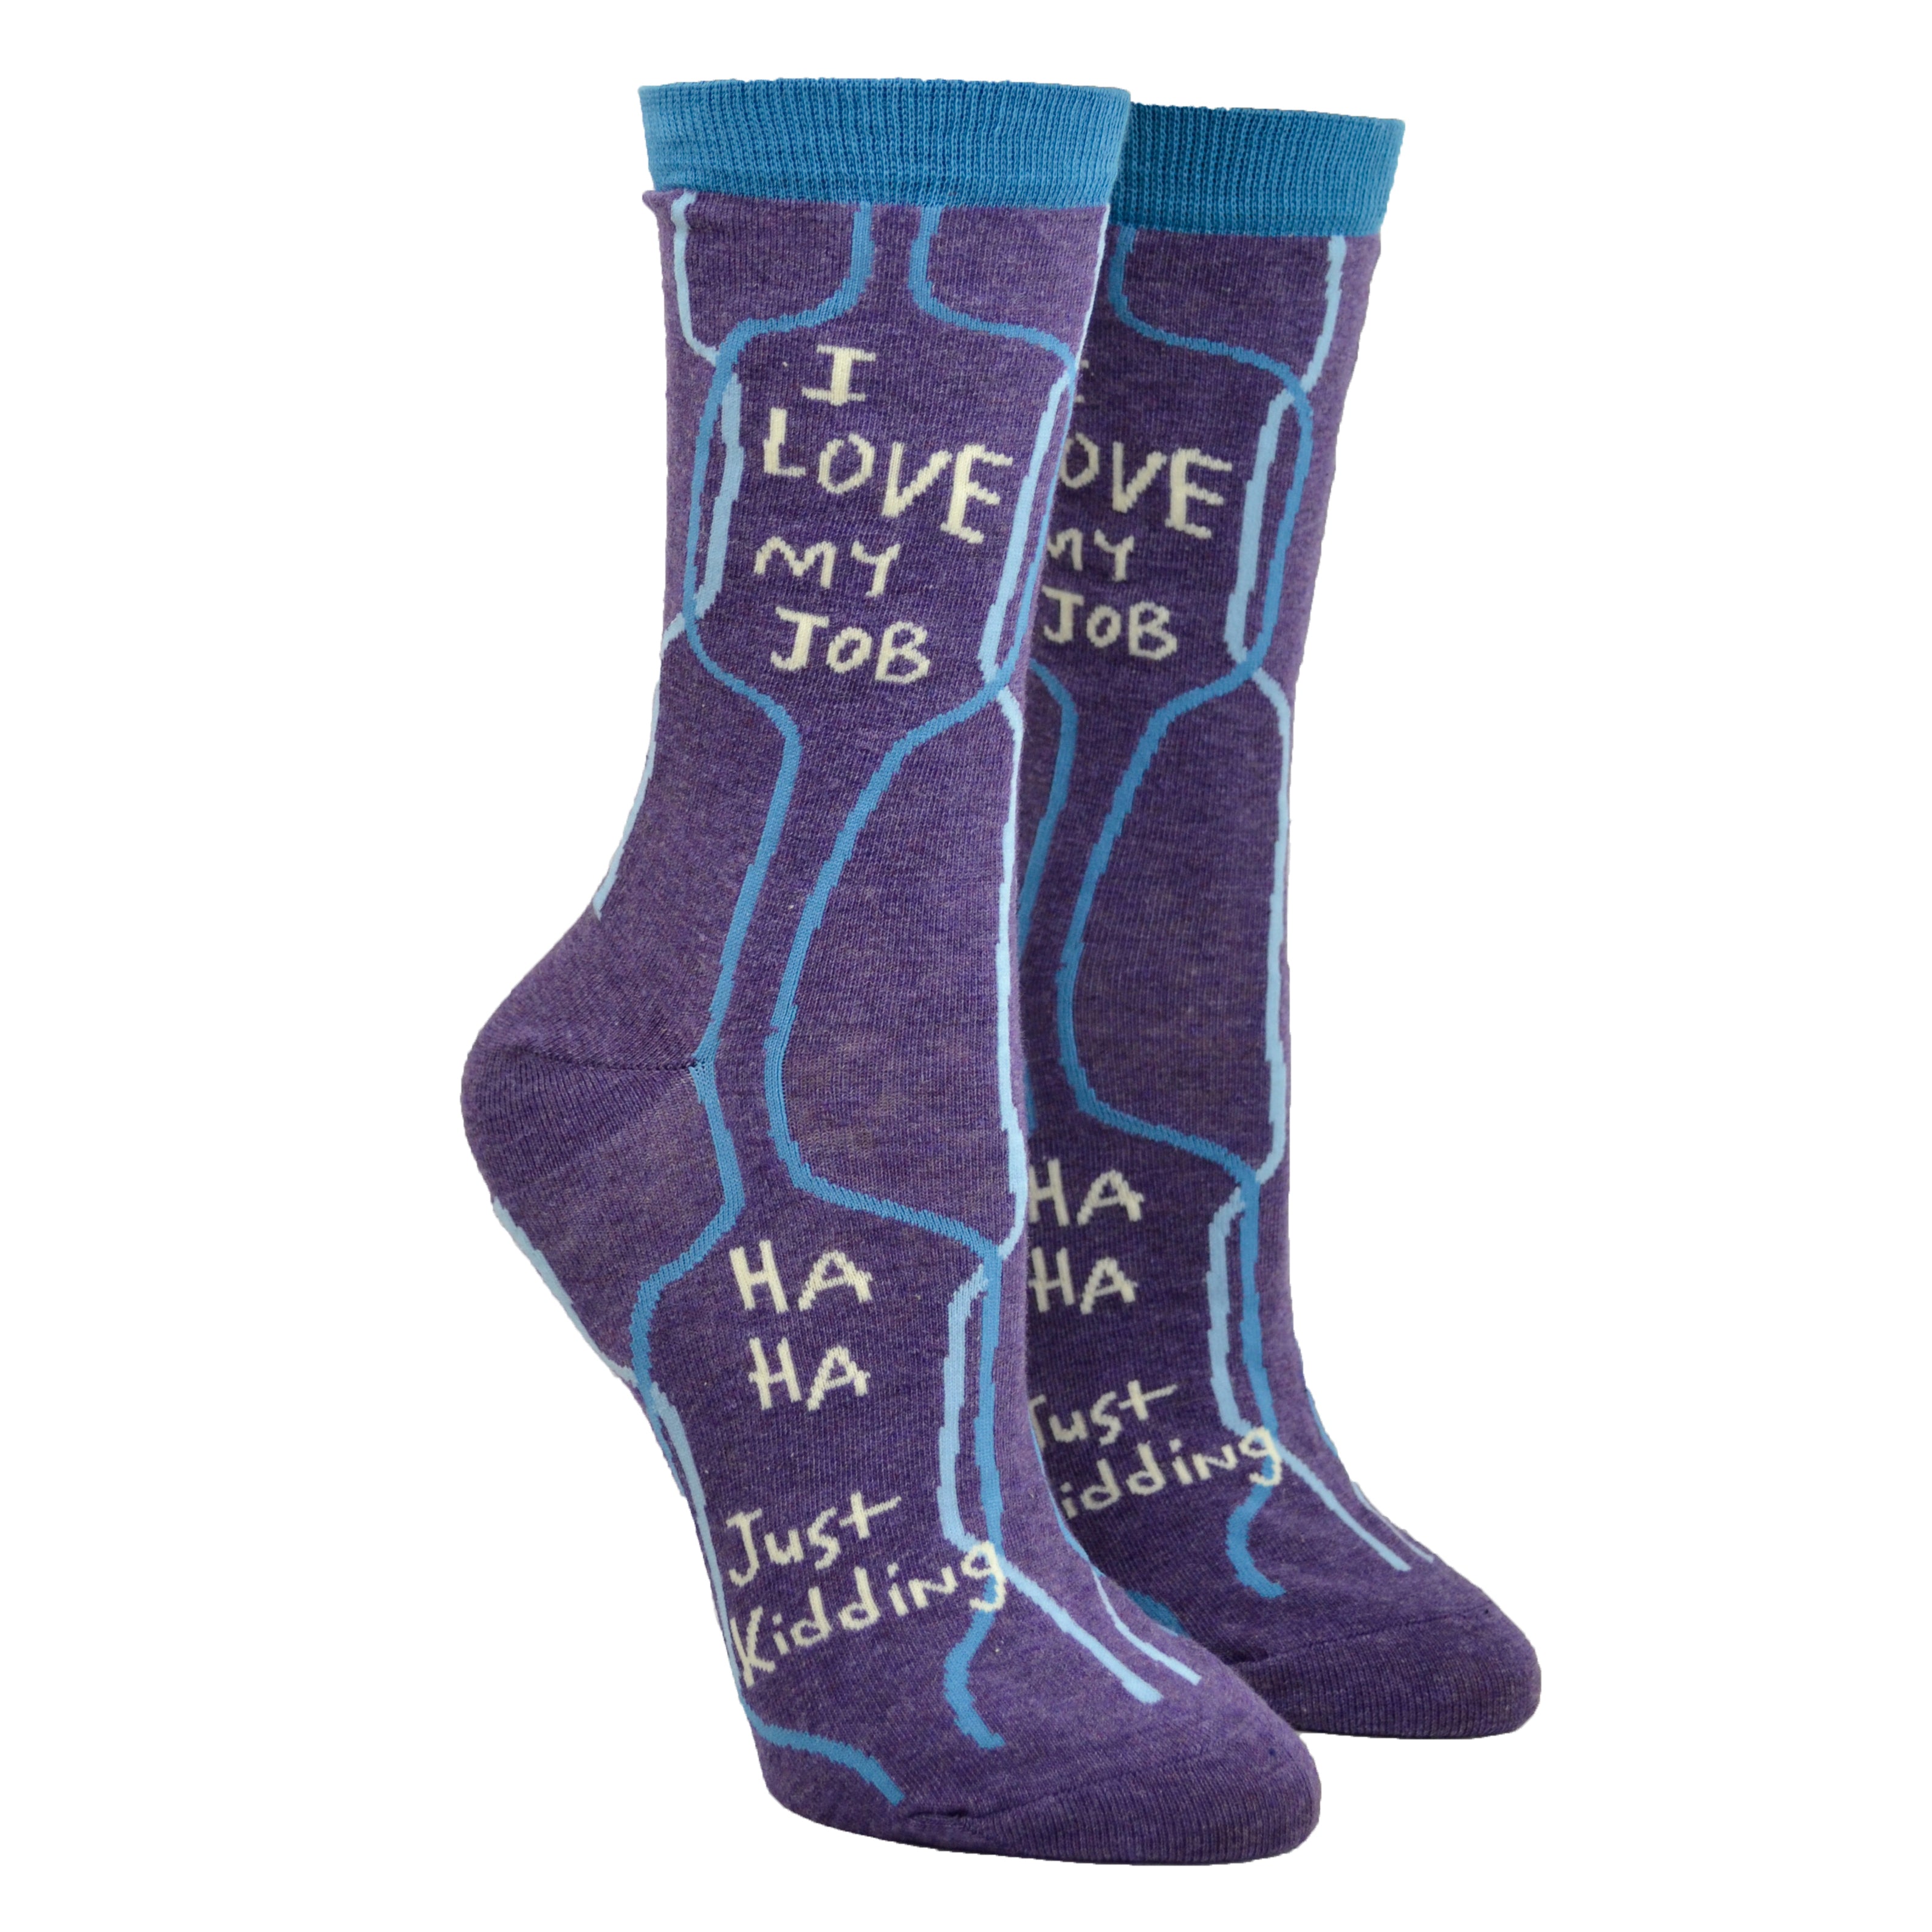 Shown on leg forms, a pair of Blue Q purple socks with a blue cuff. The outside of the leg has the text, 